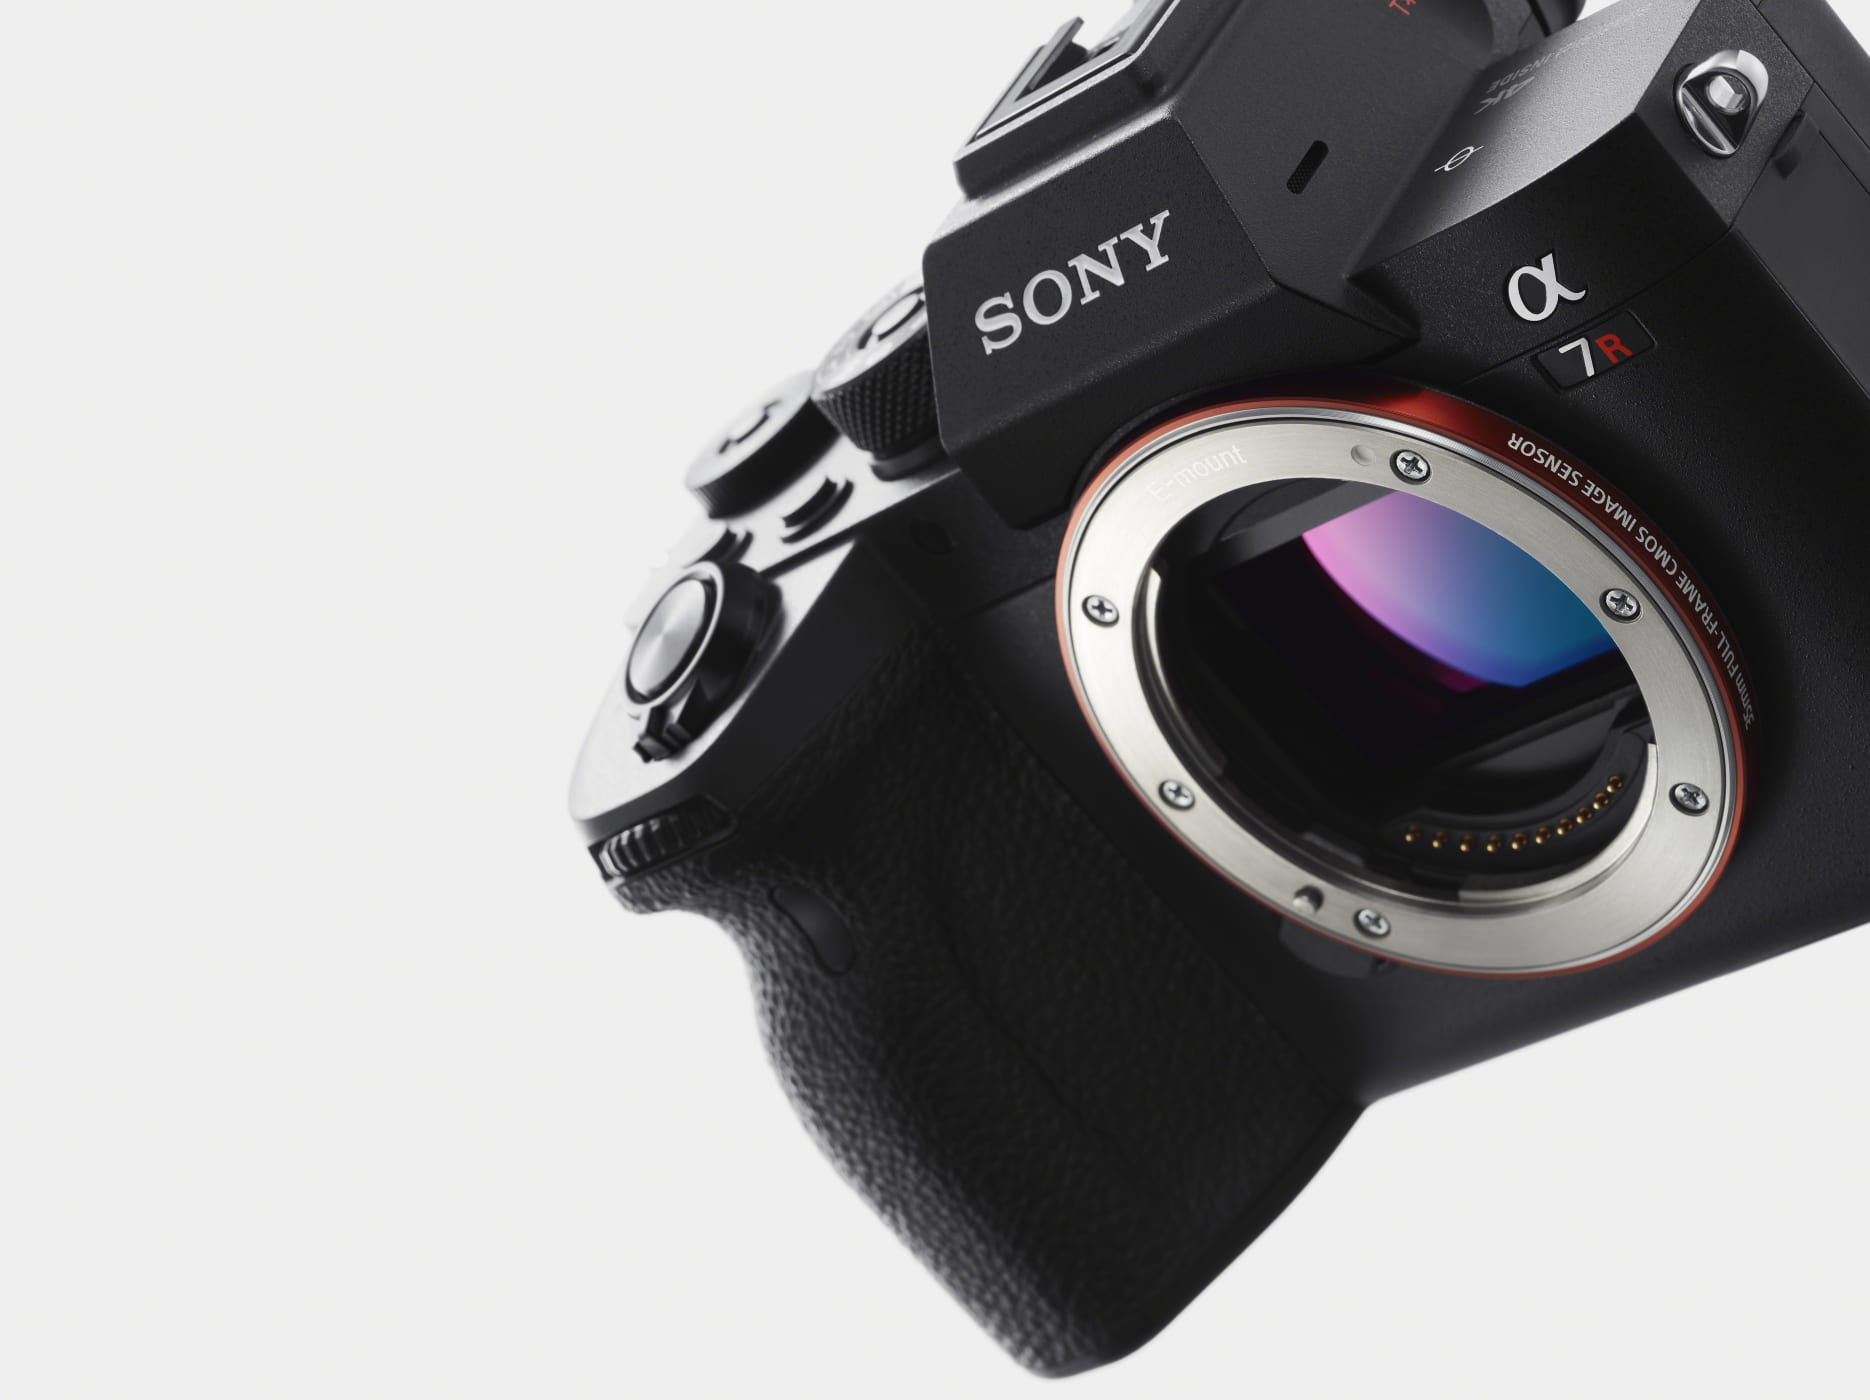 Sony a7R IV mirrorless camera additional coverage (handson reports and